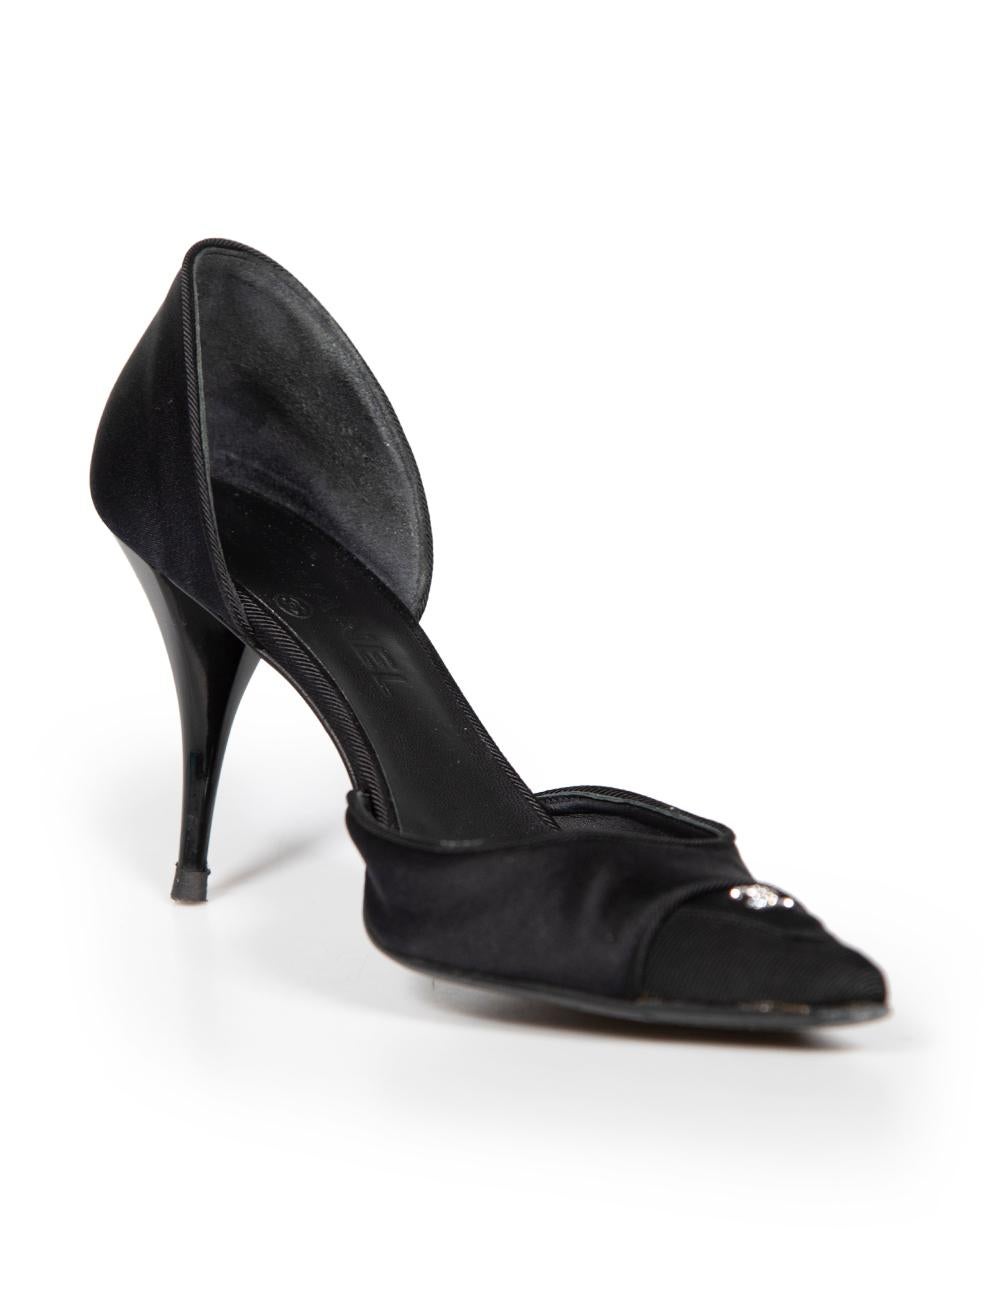 CONDITION is Very good. Minimal wear to shoes is evident. Minimal wear to both heels with abrasions and the satin of both shoes also have general creasing on this used Chanel designer resale item.
 
 
 
 Details
 
 
 Black
 
 Satin
 
 Heels
 
 Point